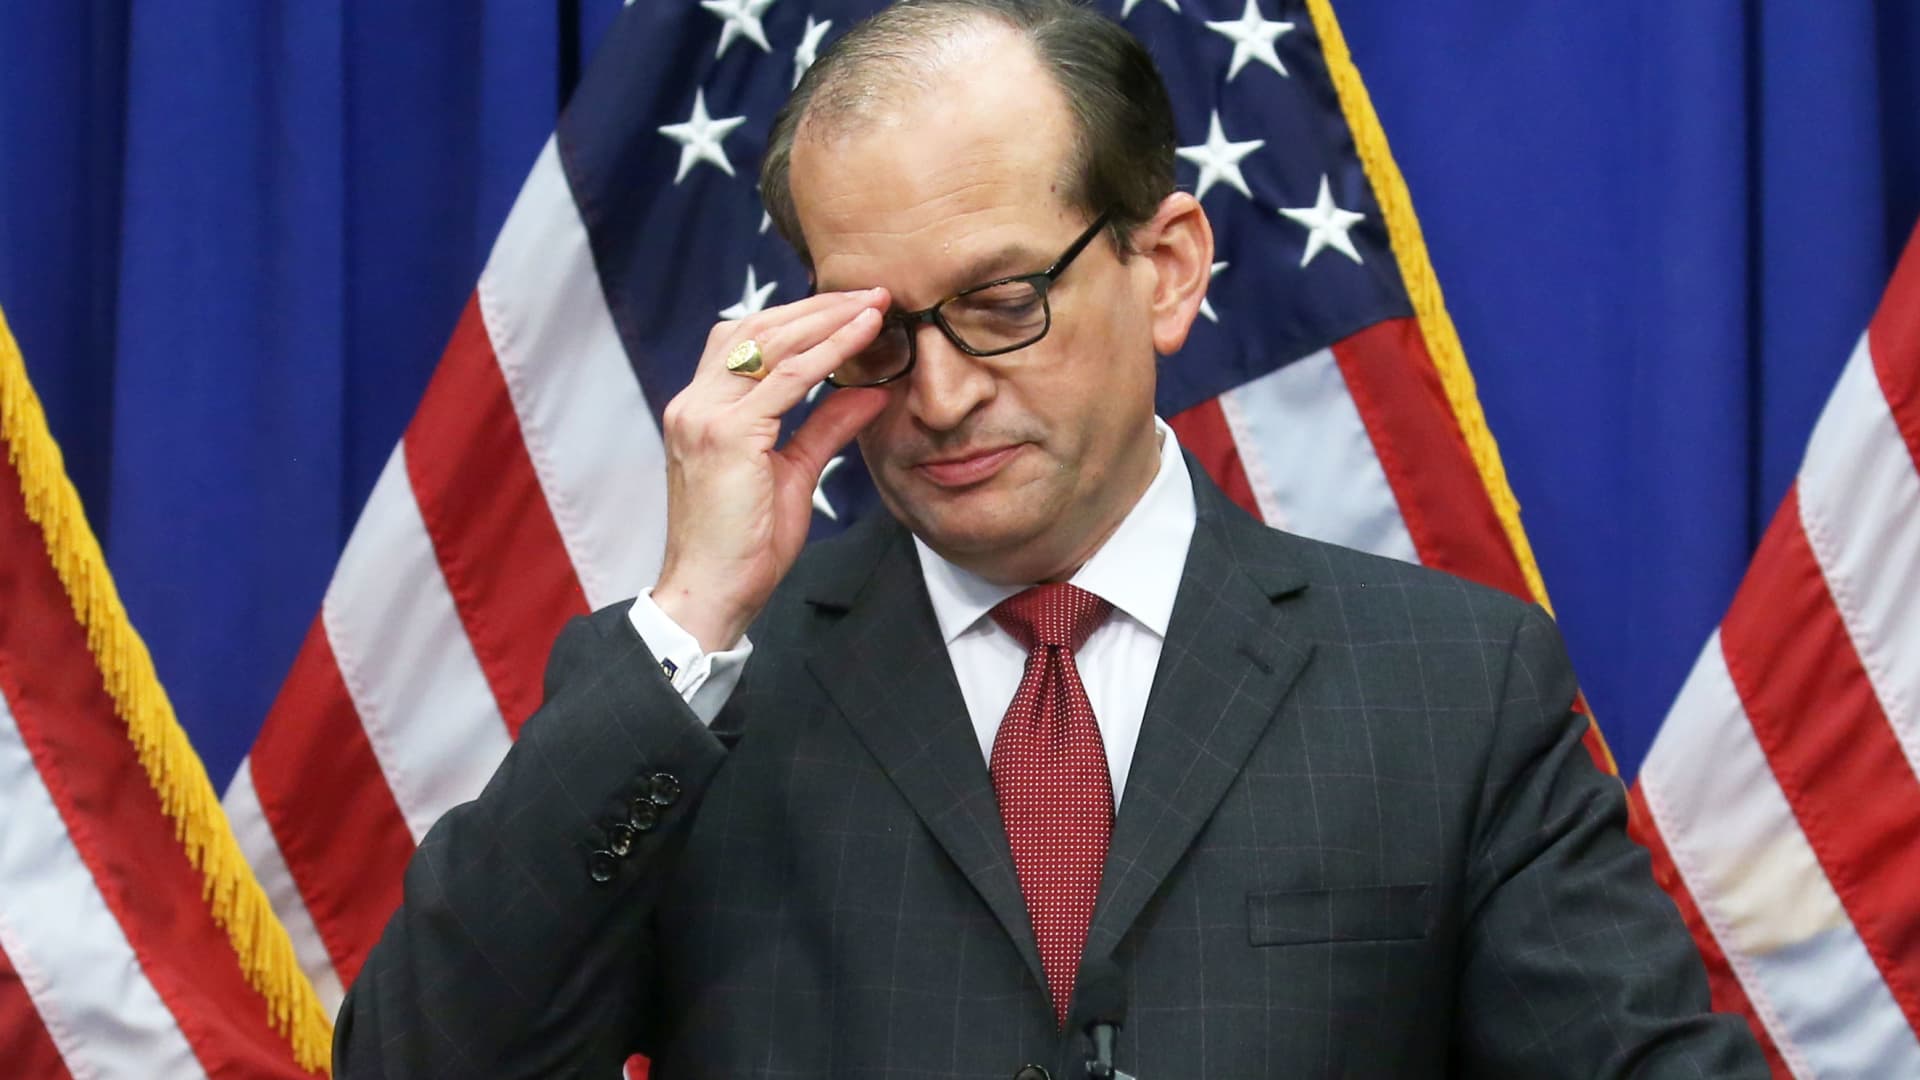 U.S. Labor Secretary Alexander Acosta makes a statement on his involvement in a non-prosecution agreement with financier Jeffrey Epstein, who has now been charged with sex trafficking in underage girls, during a news conference at the Labor Department in Washington, July 10, 2019.